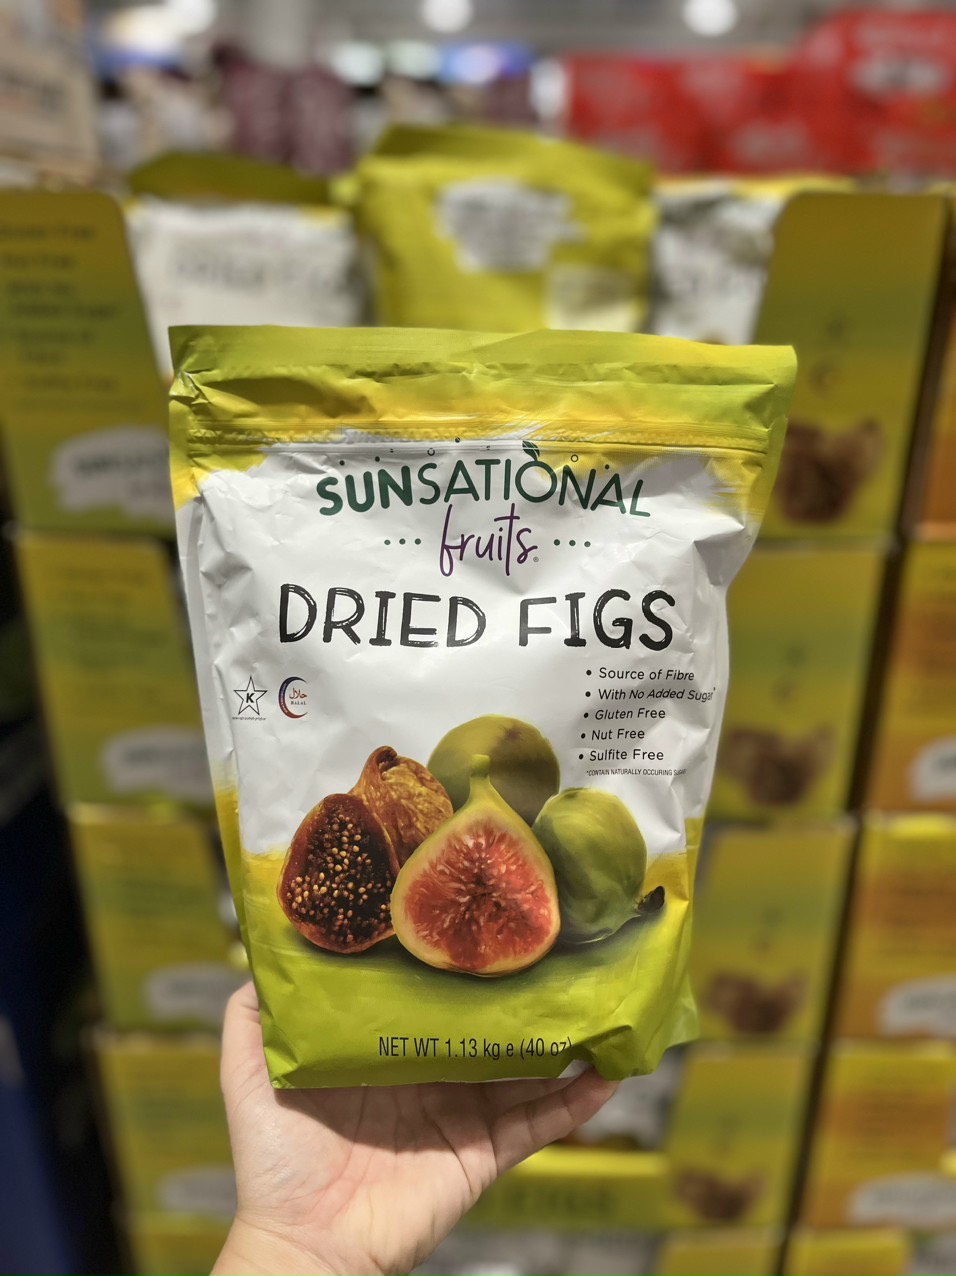 Sung Mỹ sấy Sunsational Dried Figs 1.13kg